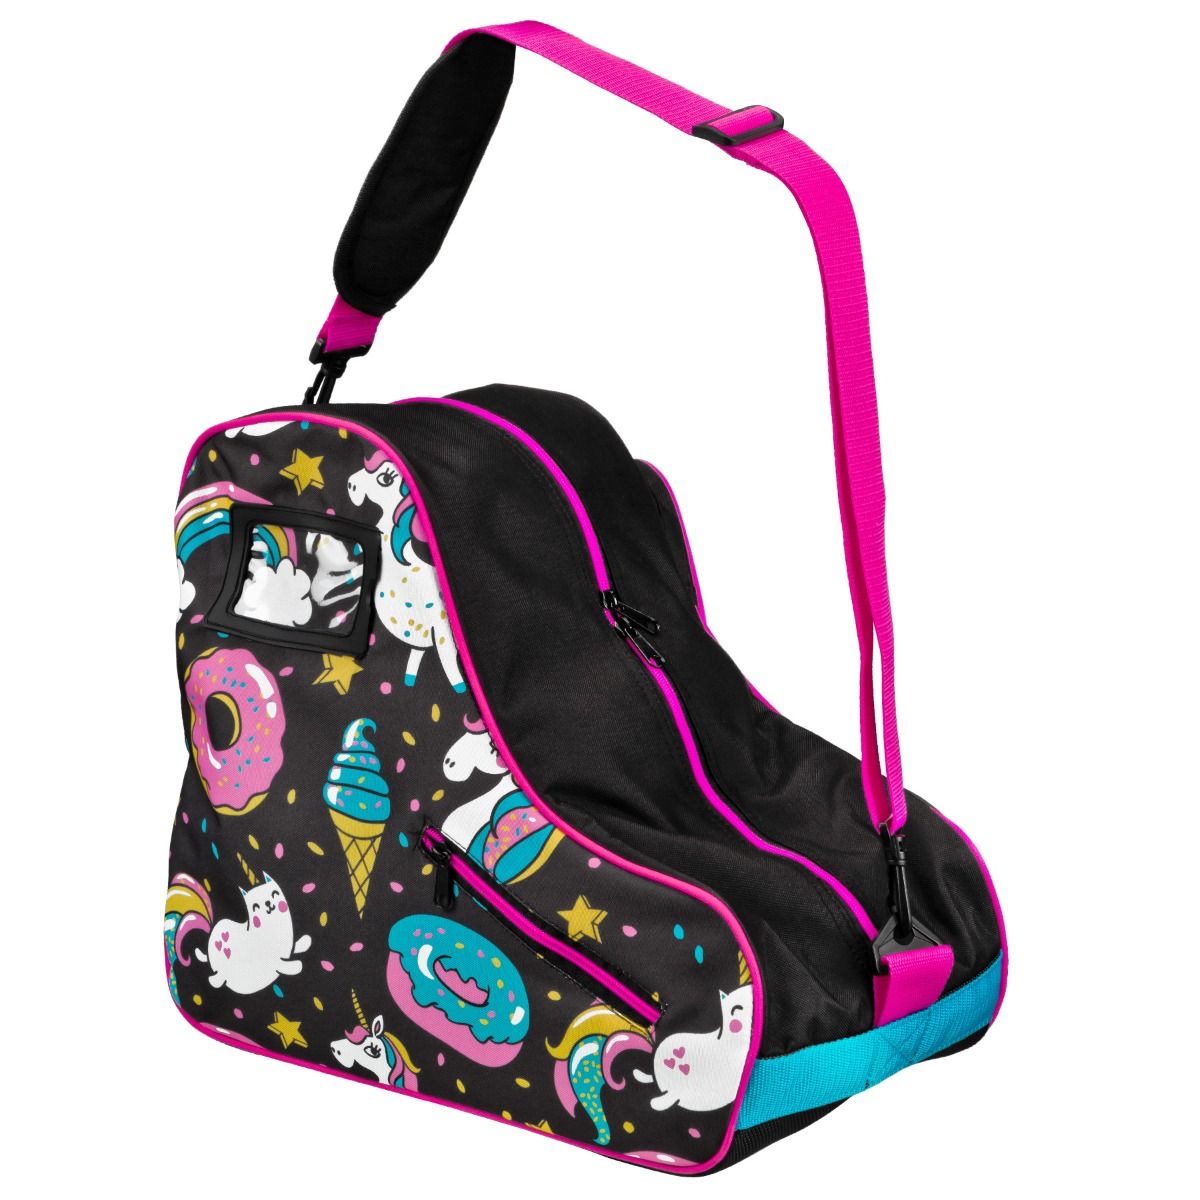 Pacer Skate Bag - Donuts Bags and Backpacks